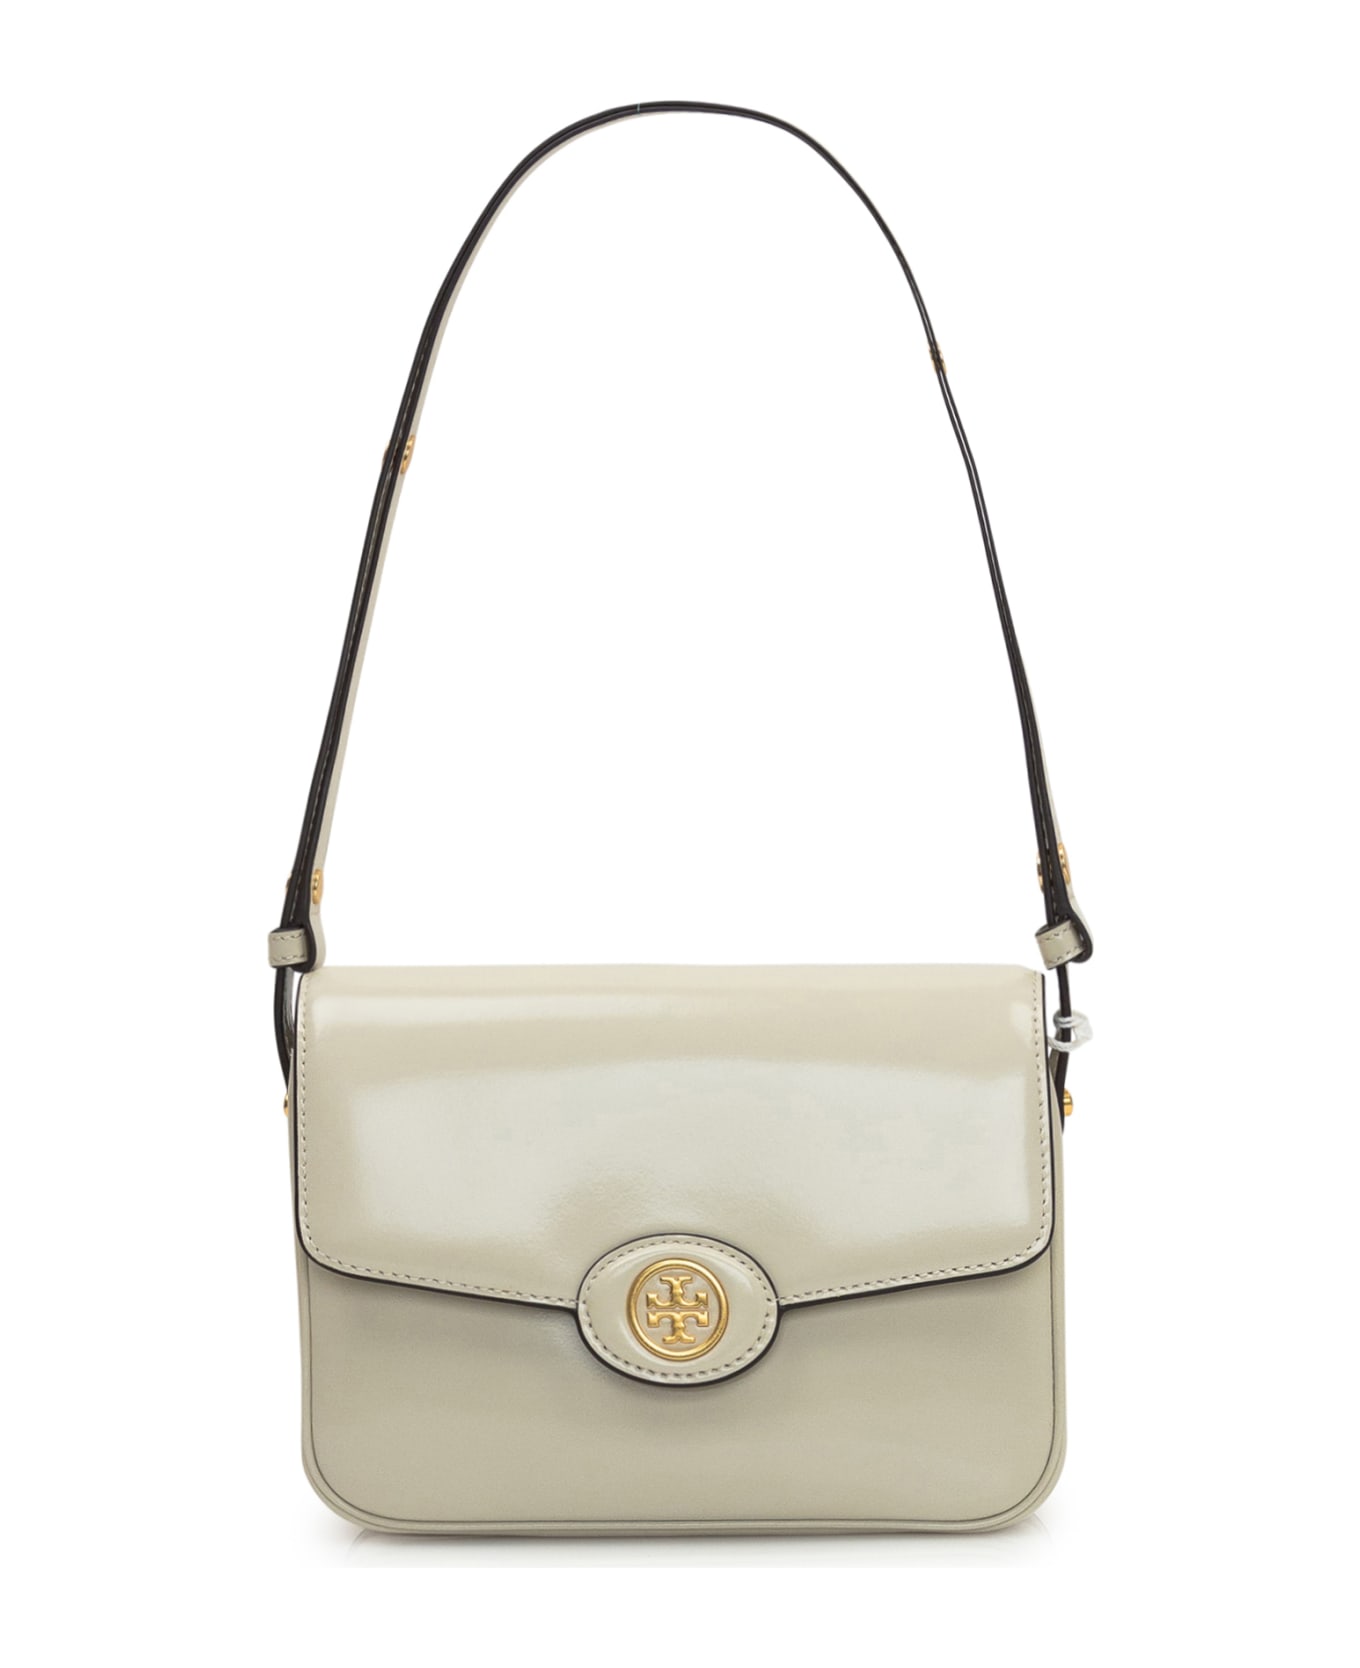 Tory Burch Robinson Leather Shoulder Bag - White